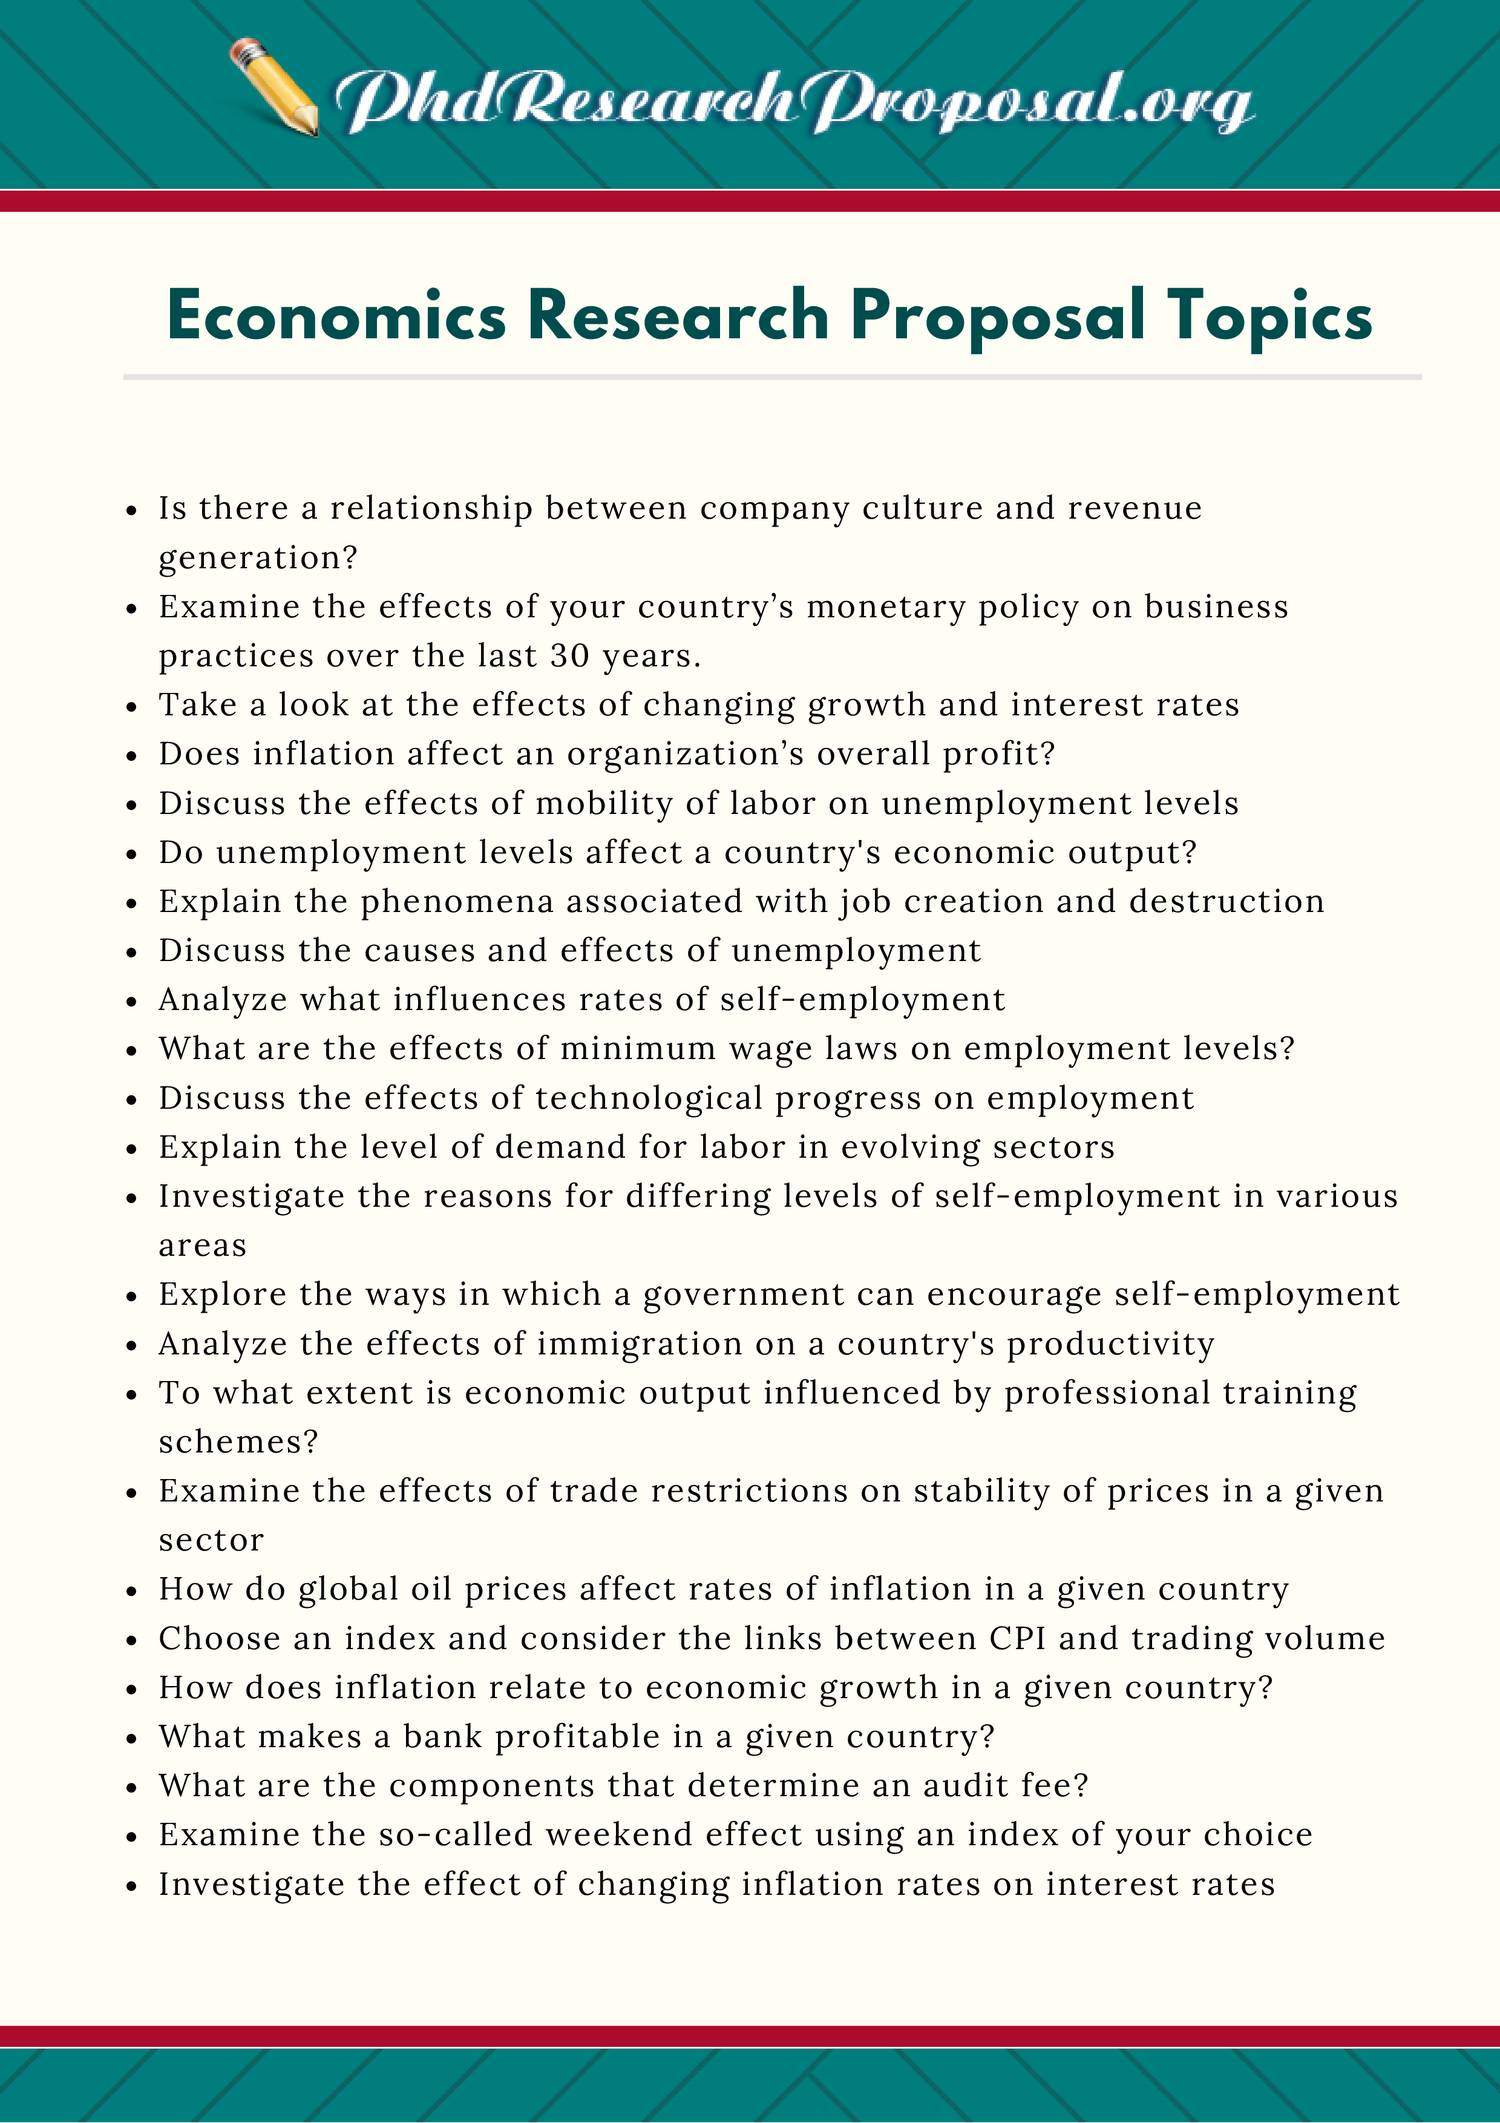 how to write an economics research proposal